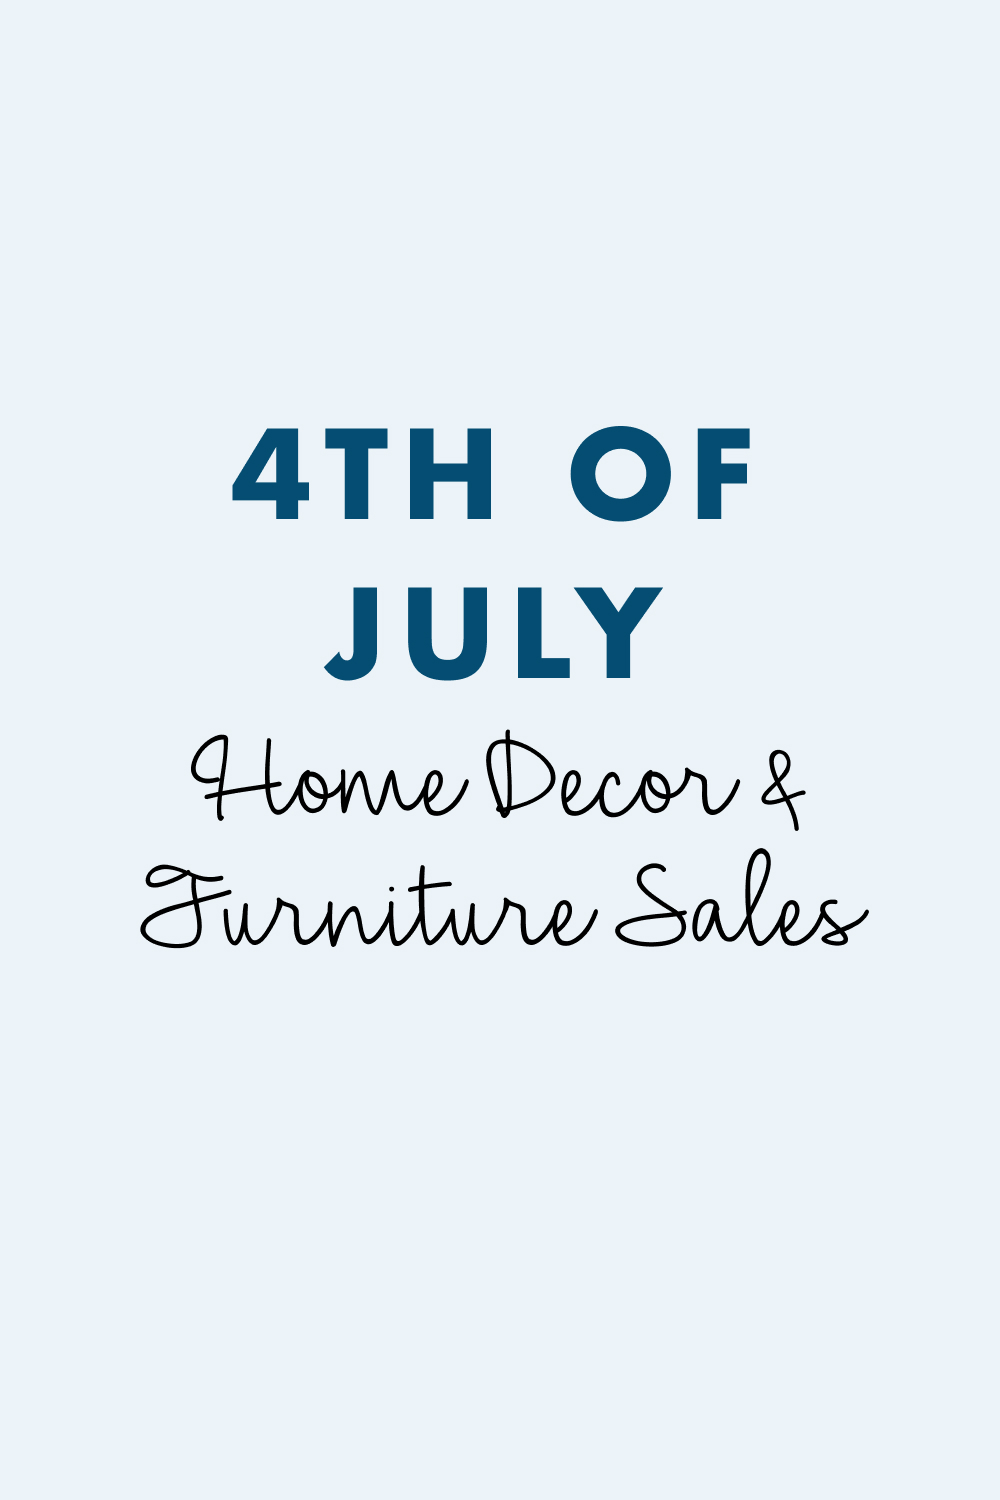 4th of July Home Decor Furniture Sales